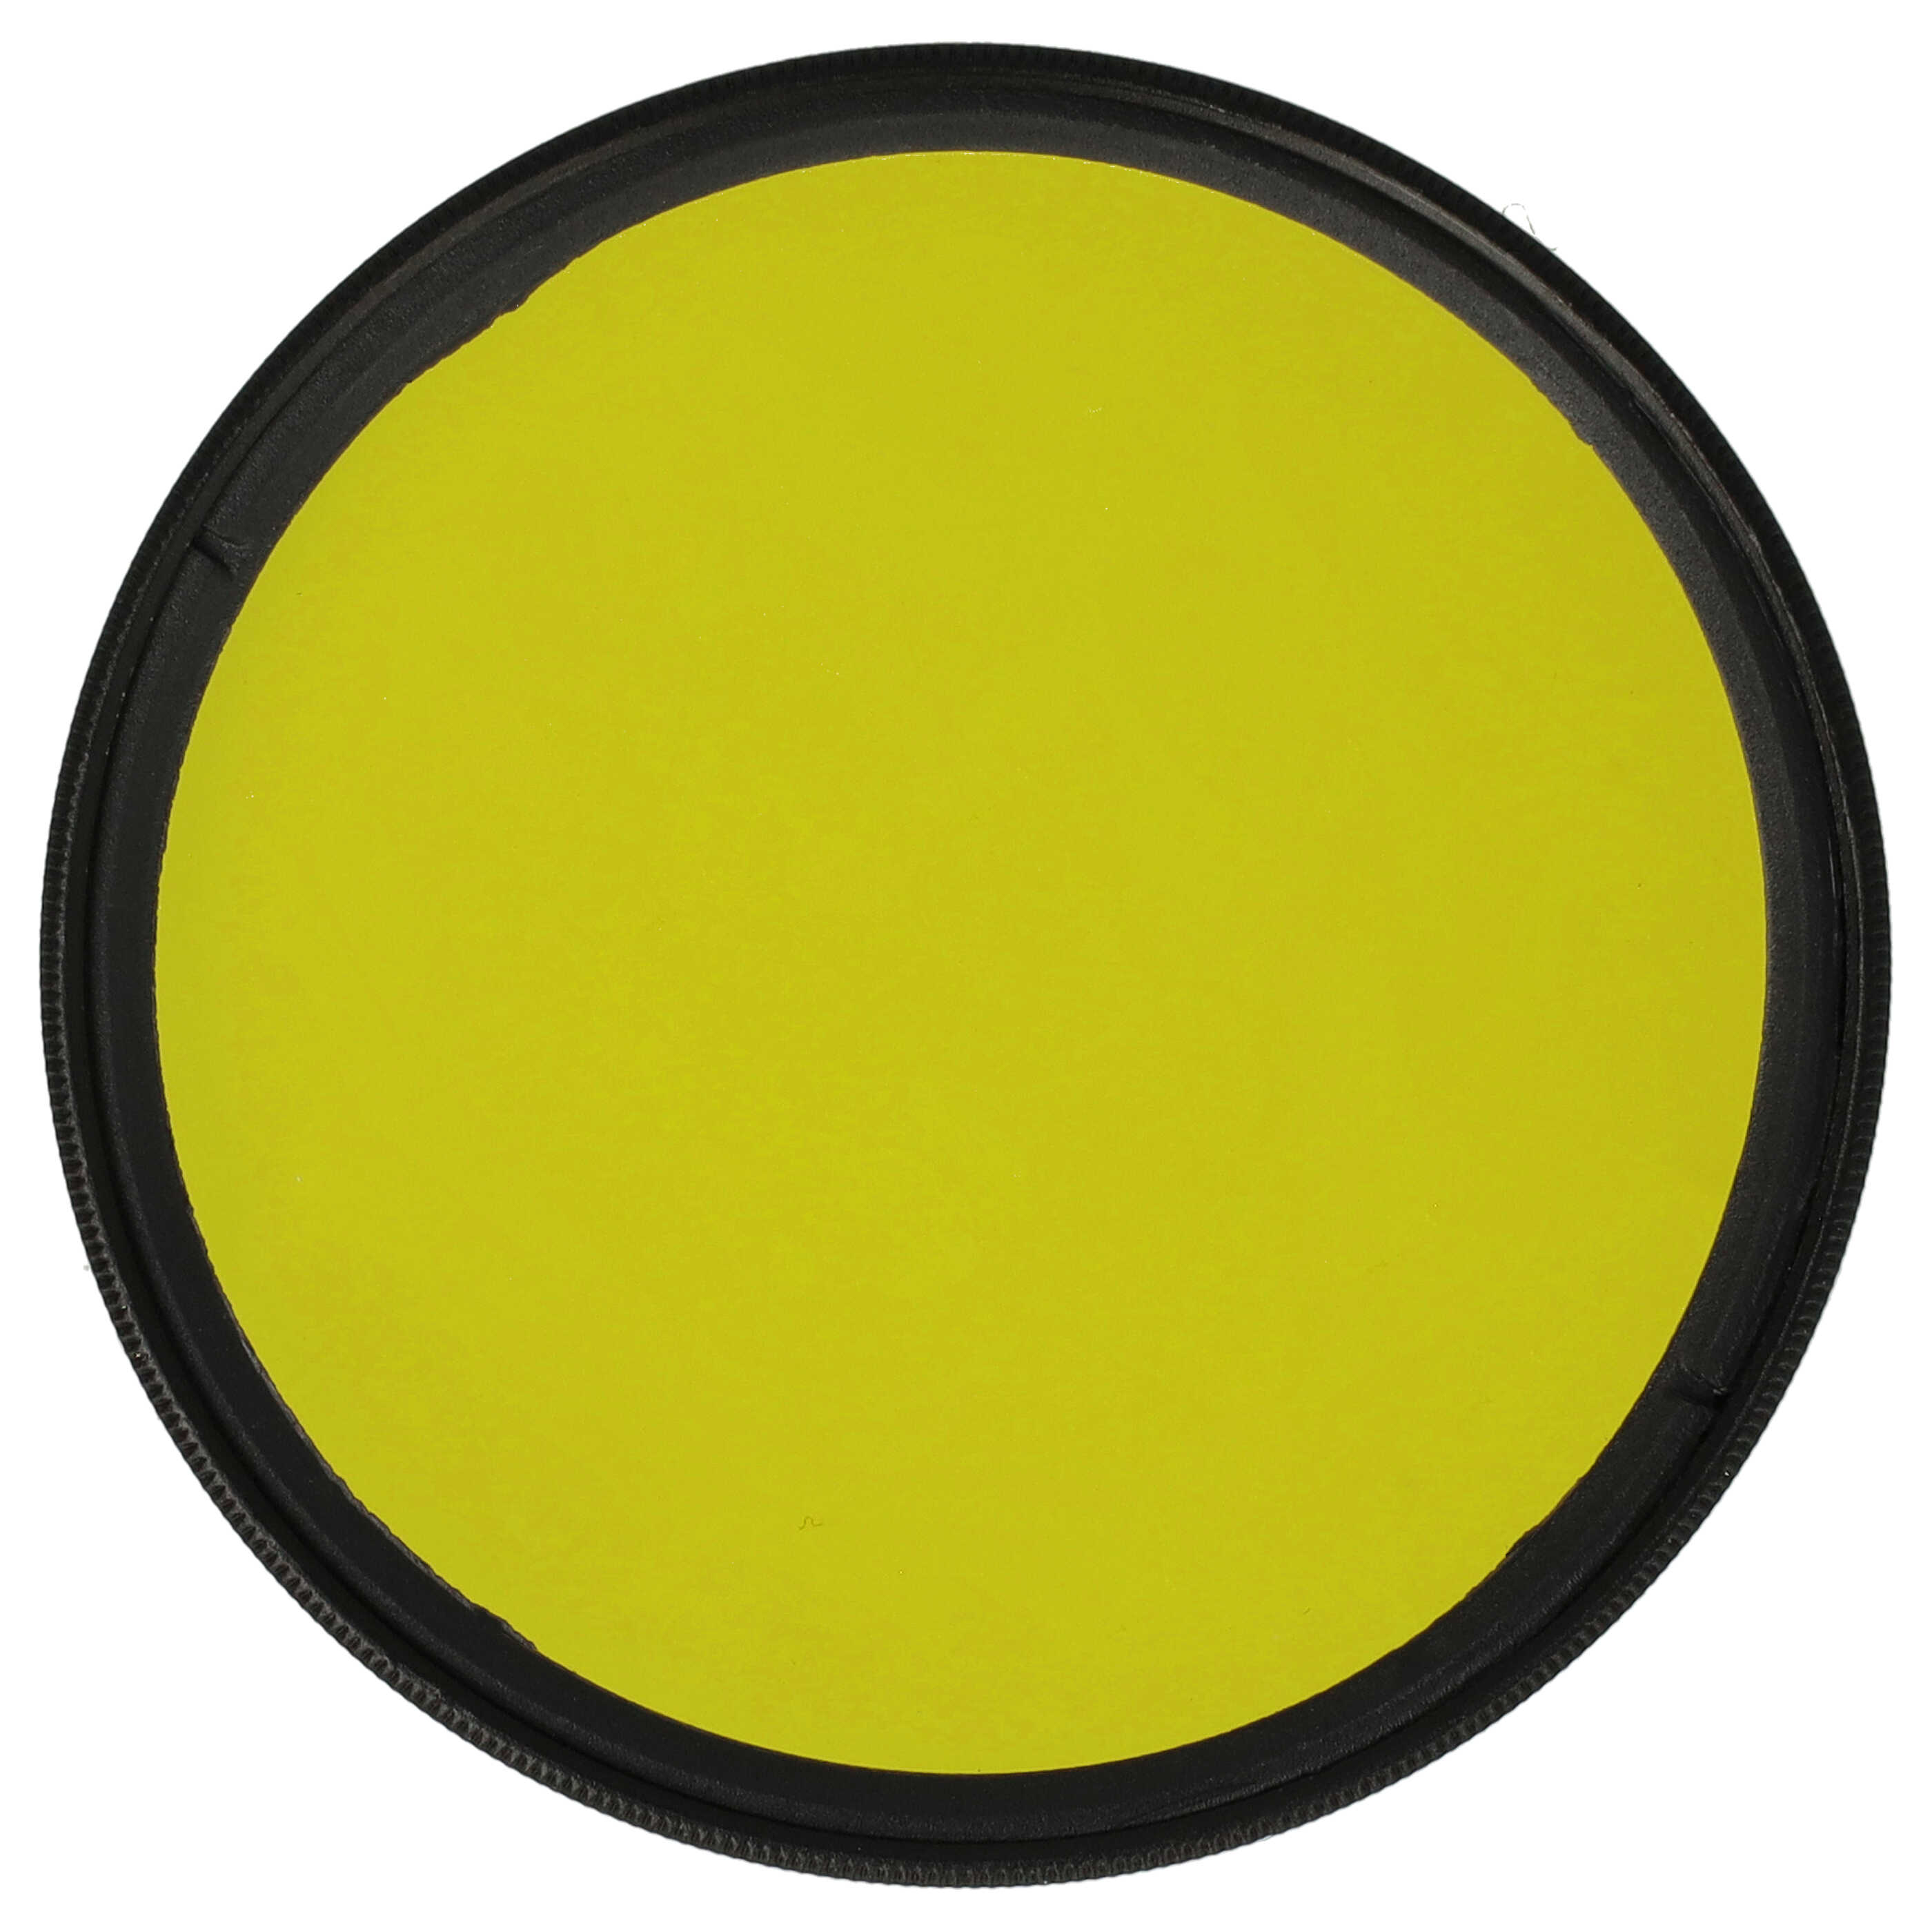 Coloured Filter, Yellow suitable for Camera Lenses with 62 mm Filter Thread - Yellow Filter